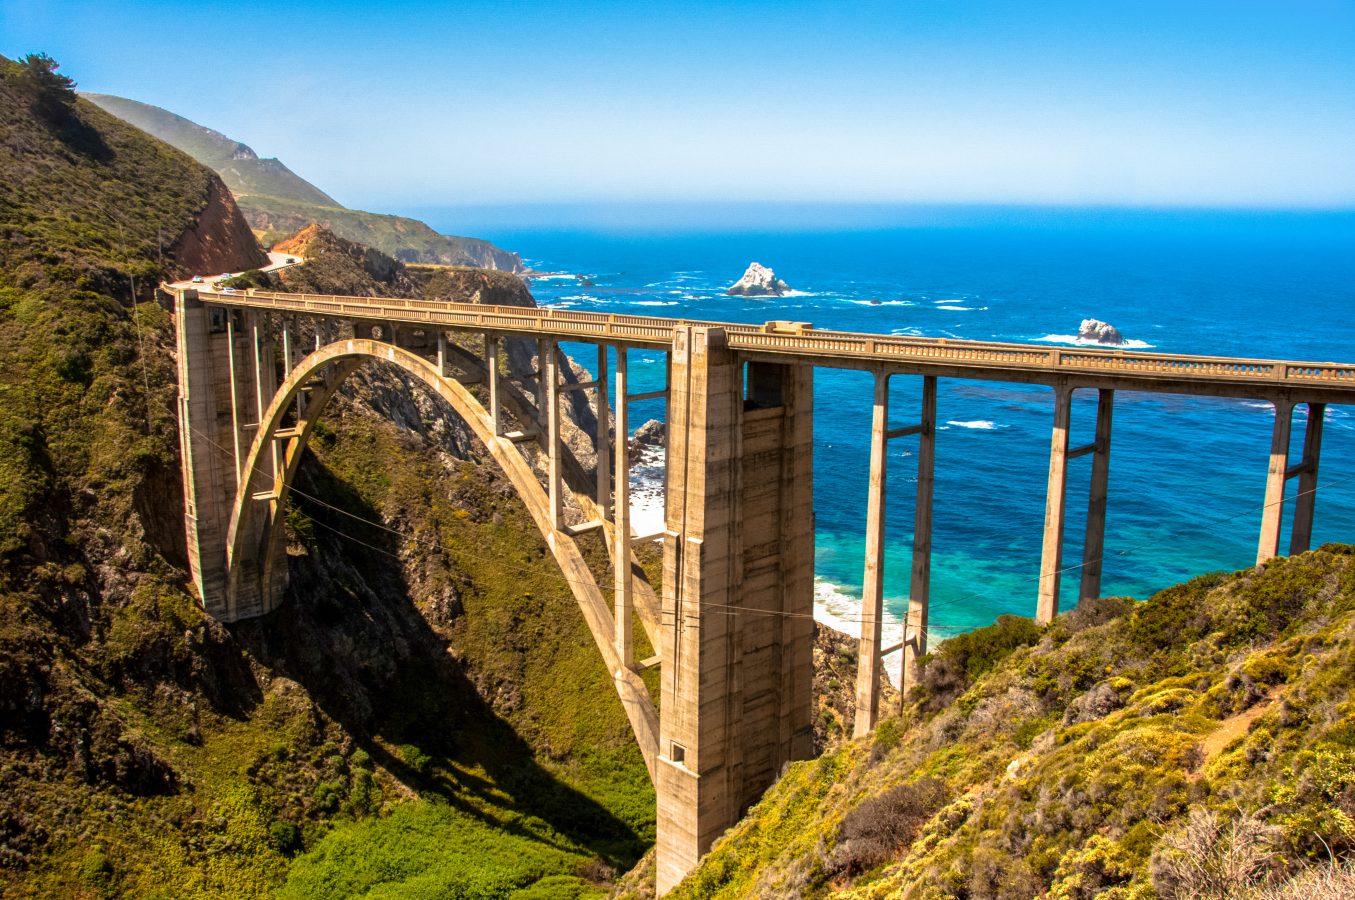 Bixby Bridge in Big Sur, California, USA along the Pacific Coast Highway - a really cool road trips spot!